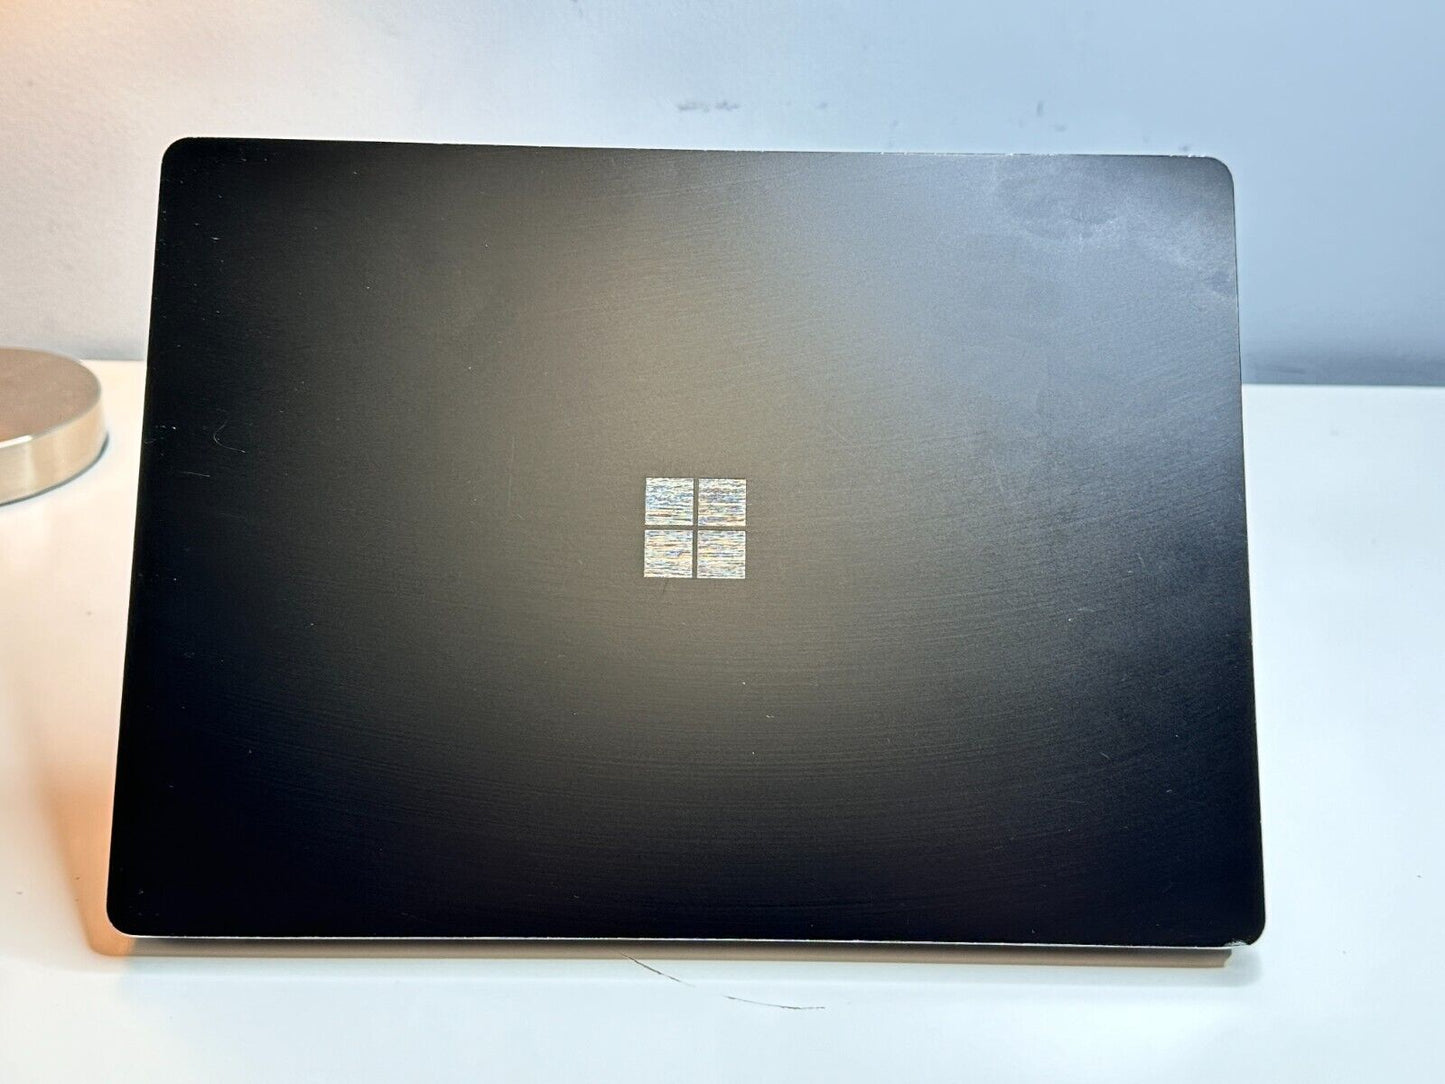 13" Surface Laptop 3 (i5-1035G7, 8GB DDR4, 256GB NVMe M.2 SSD) w/ Touch Display